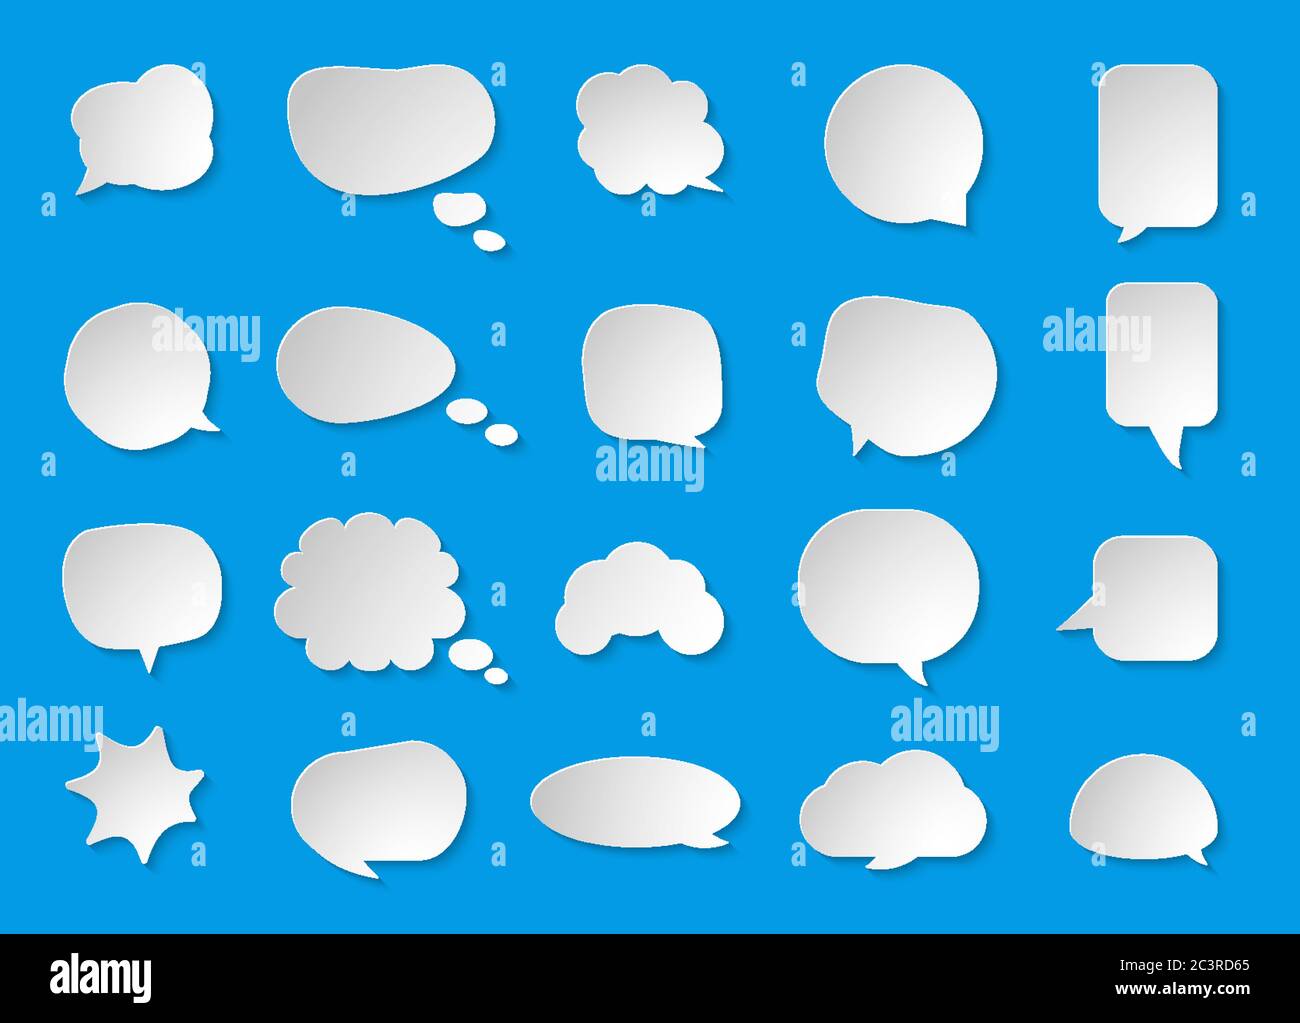 Comic paper cut speech bubble set. Empty text box cloud. Abstract icon different shapes blank doodle bubbles. 3D effect comics message balloon template. Isolated on blue background vector illustration Stock Vector